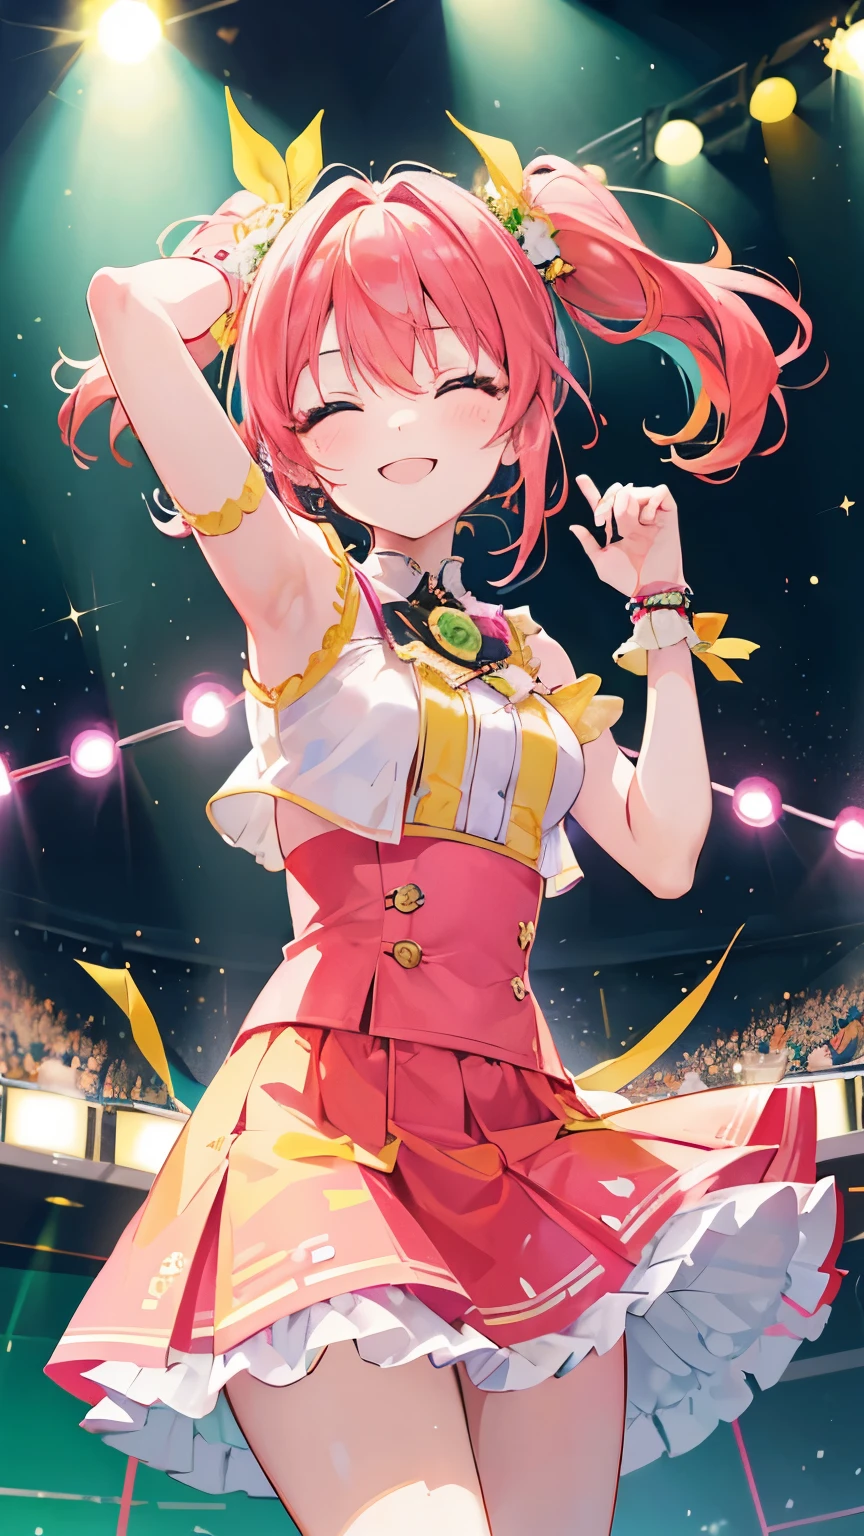 Five Girls, Idol Group, (Jumping), close your eyes, (smile) (Hand in hand), Raise your hand in the air, Pink Short Hair, Long yellow ponytail, Long bright green hair, Red Long Twintails, Long Blue Hair, Idol Costumes, 大きなsmile, (Colouful Concert Stage View), Ultra Sharp, 8k, masterpiece